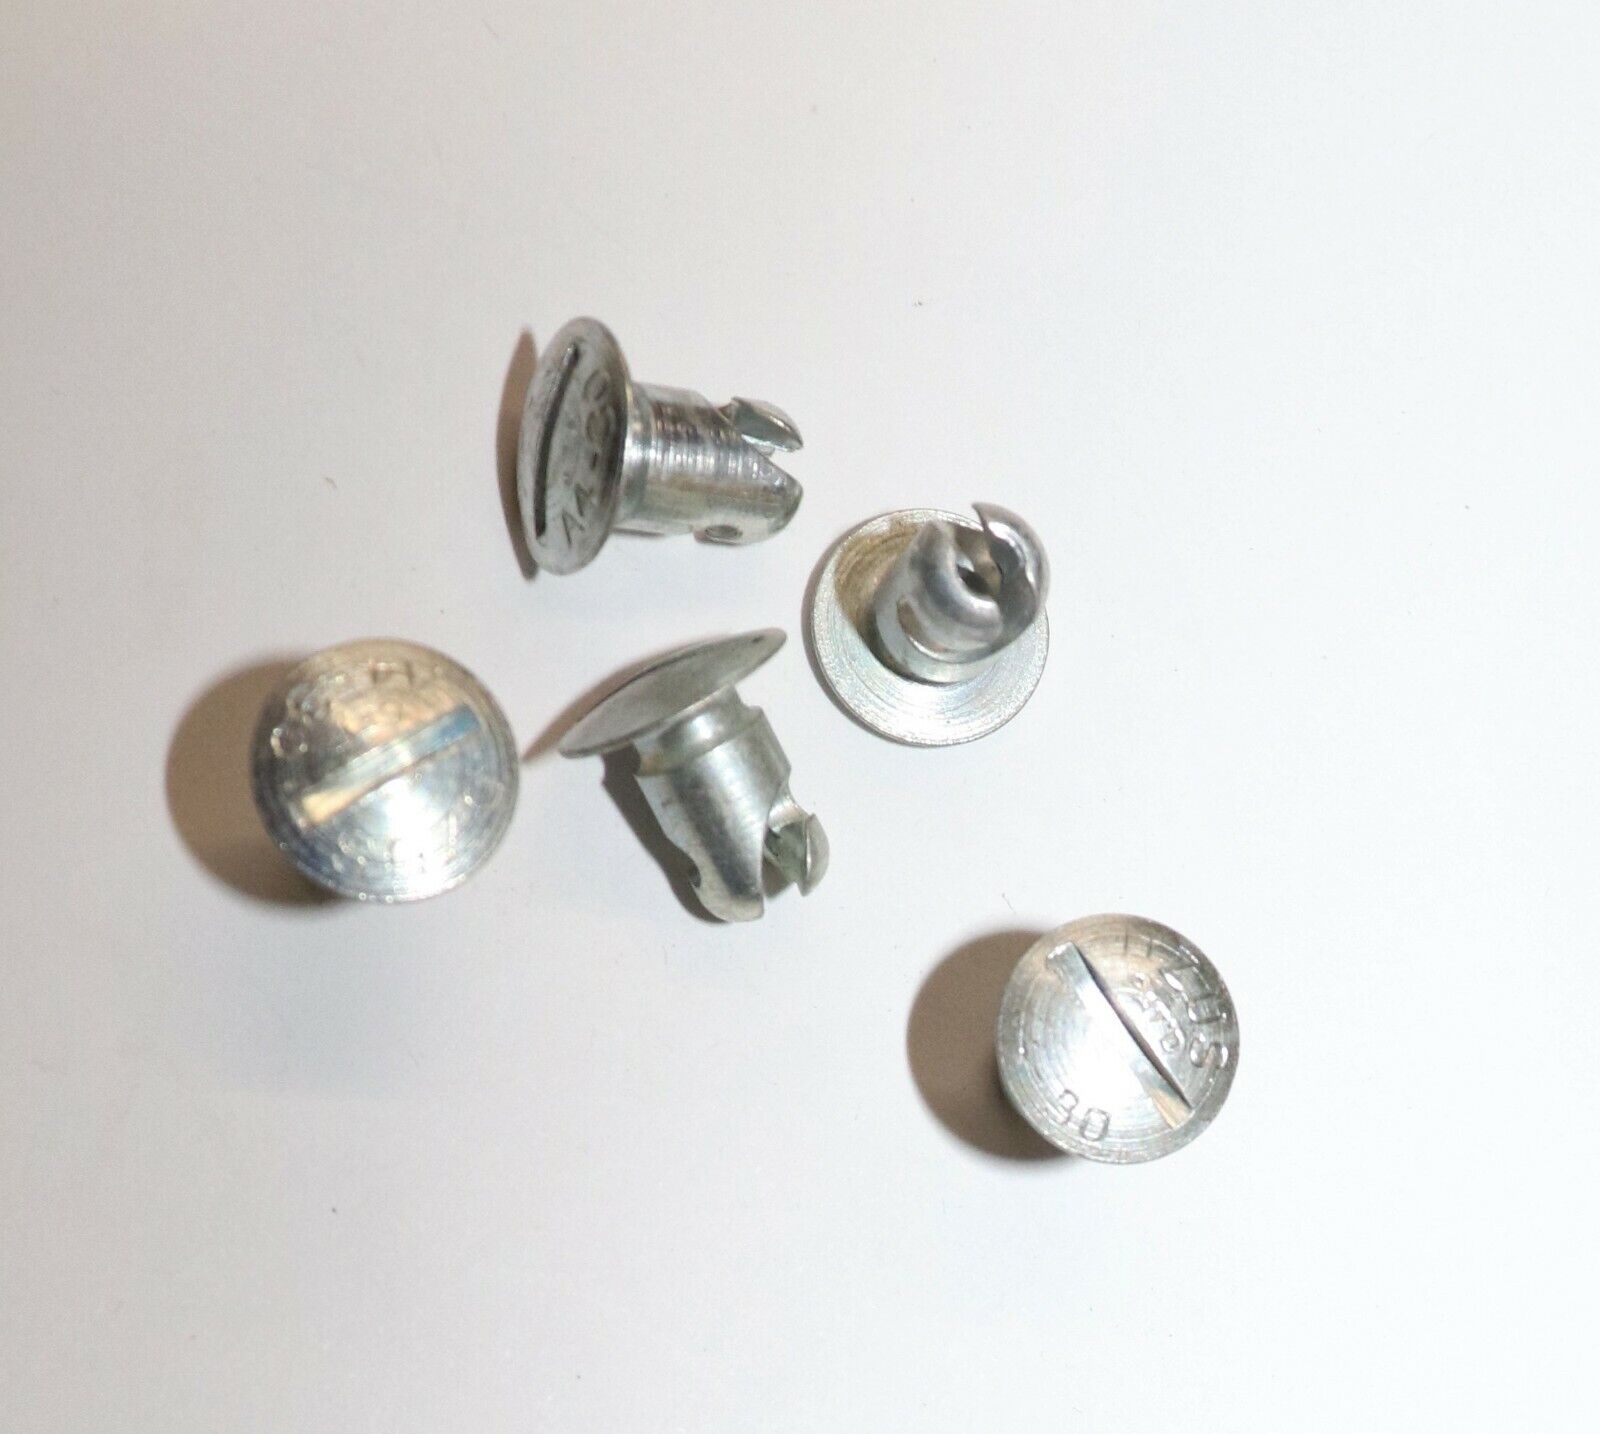 5 New A4-30 Oval Head Stud Short DZUS Fasteners - Get 5 for $4.95